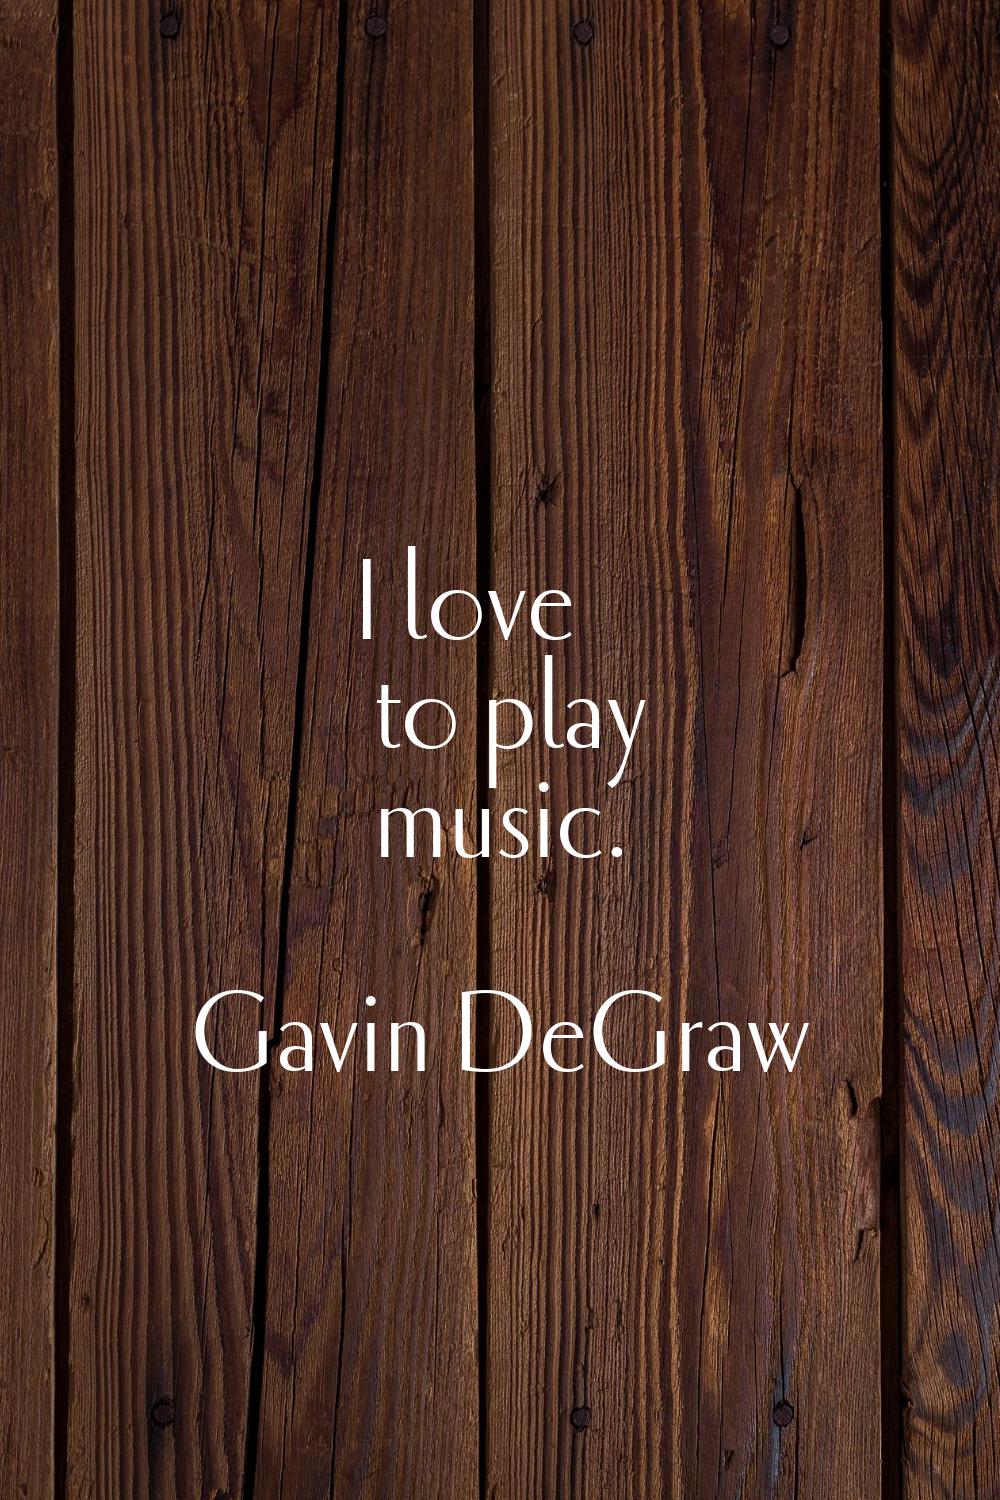 I love to play music.